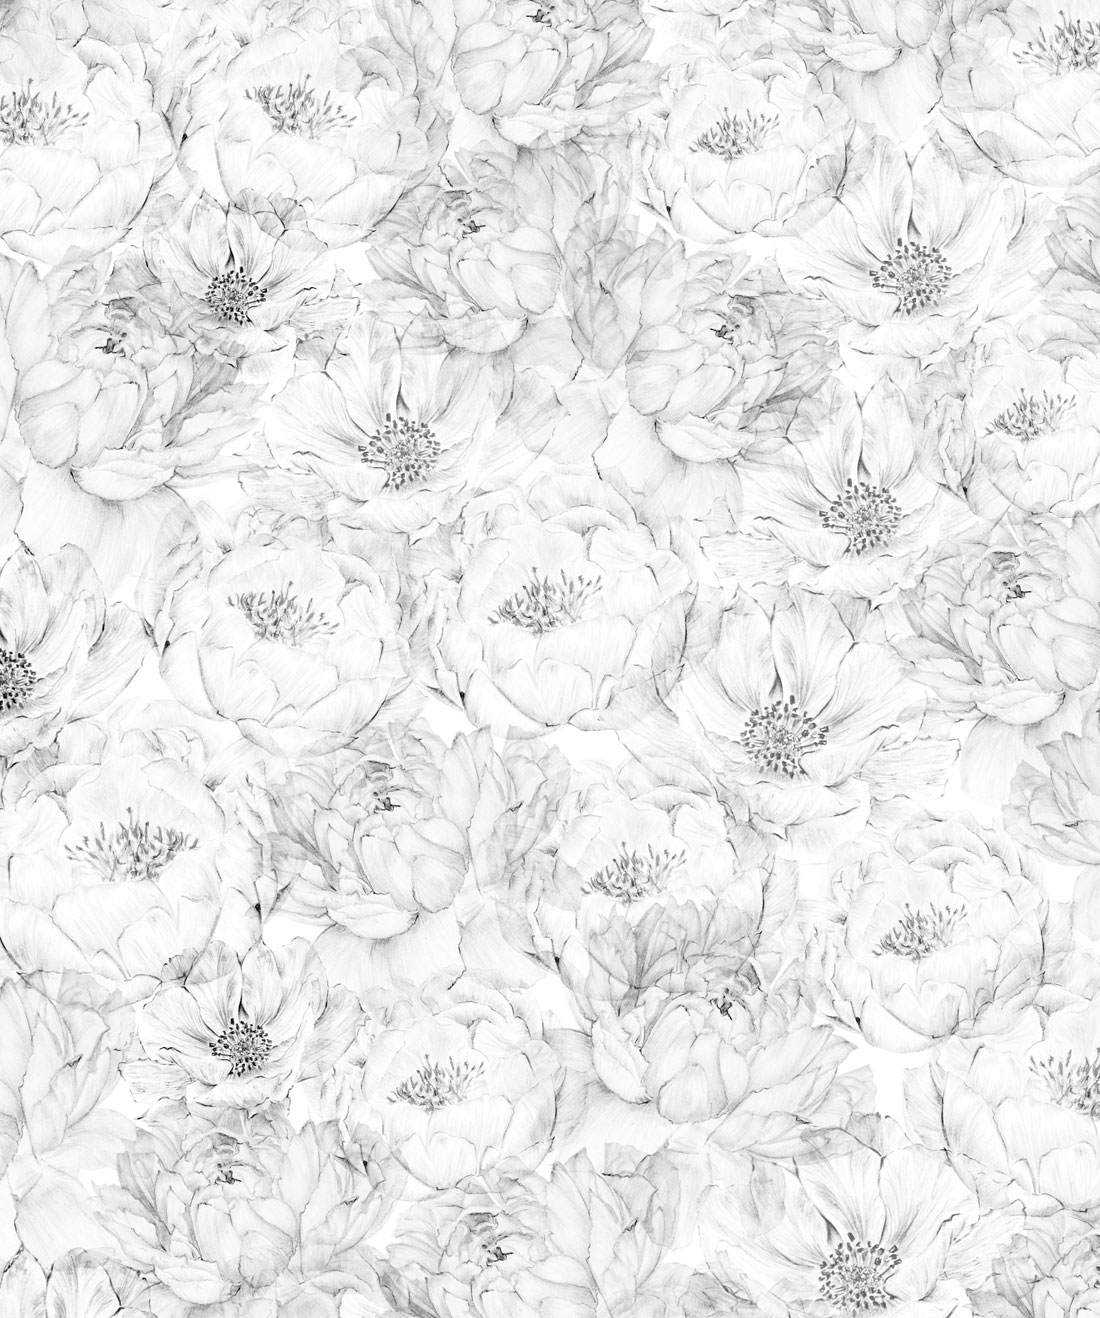 Black and White Floral Wallpaper - Etsy